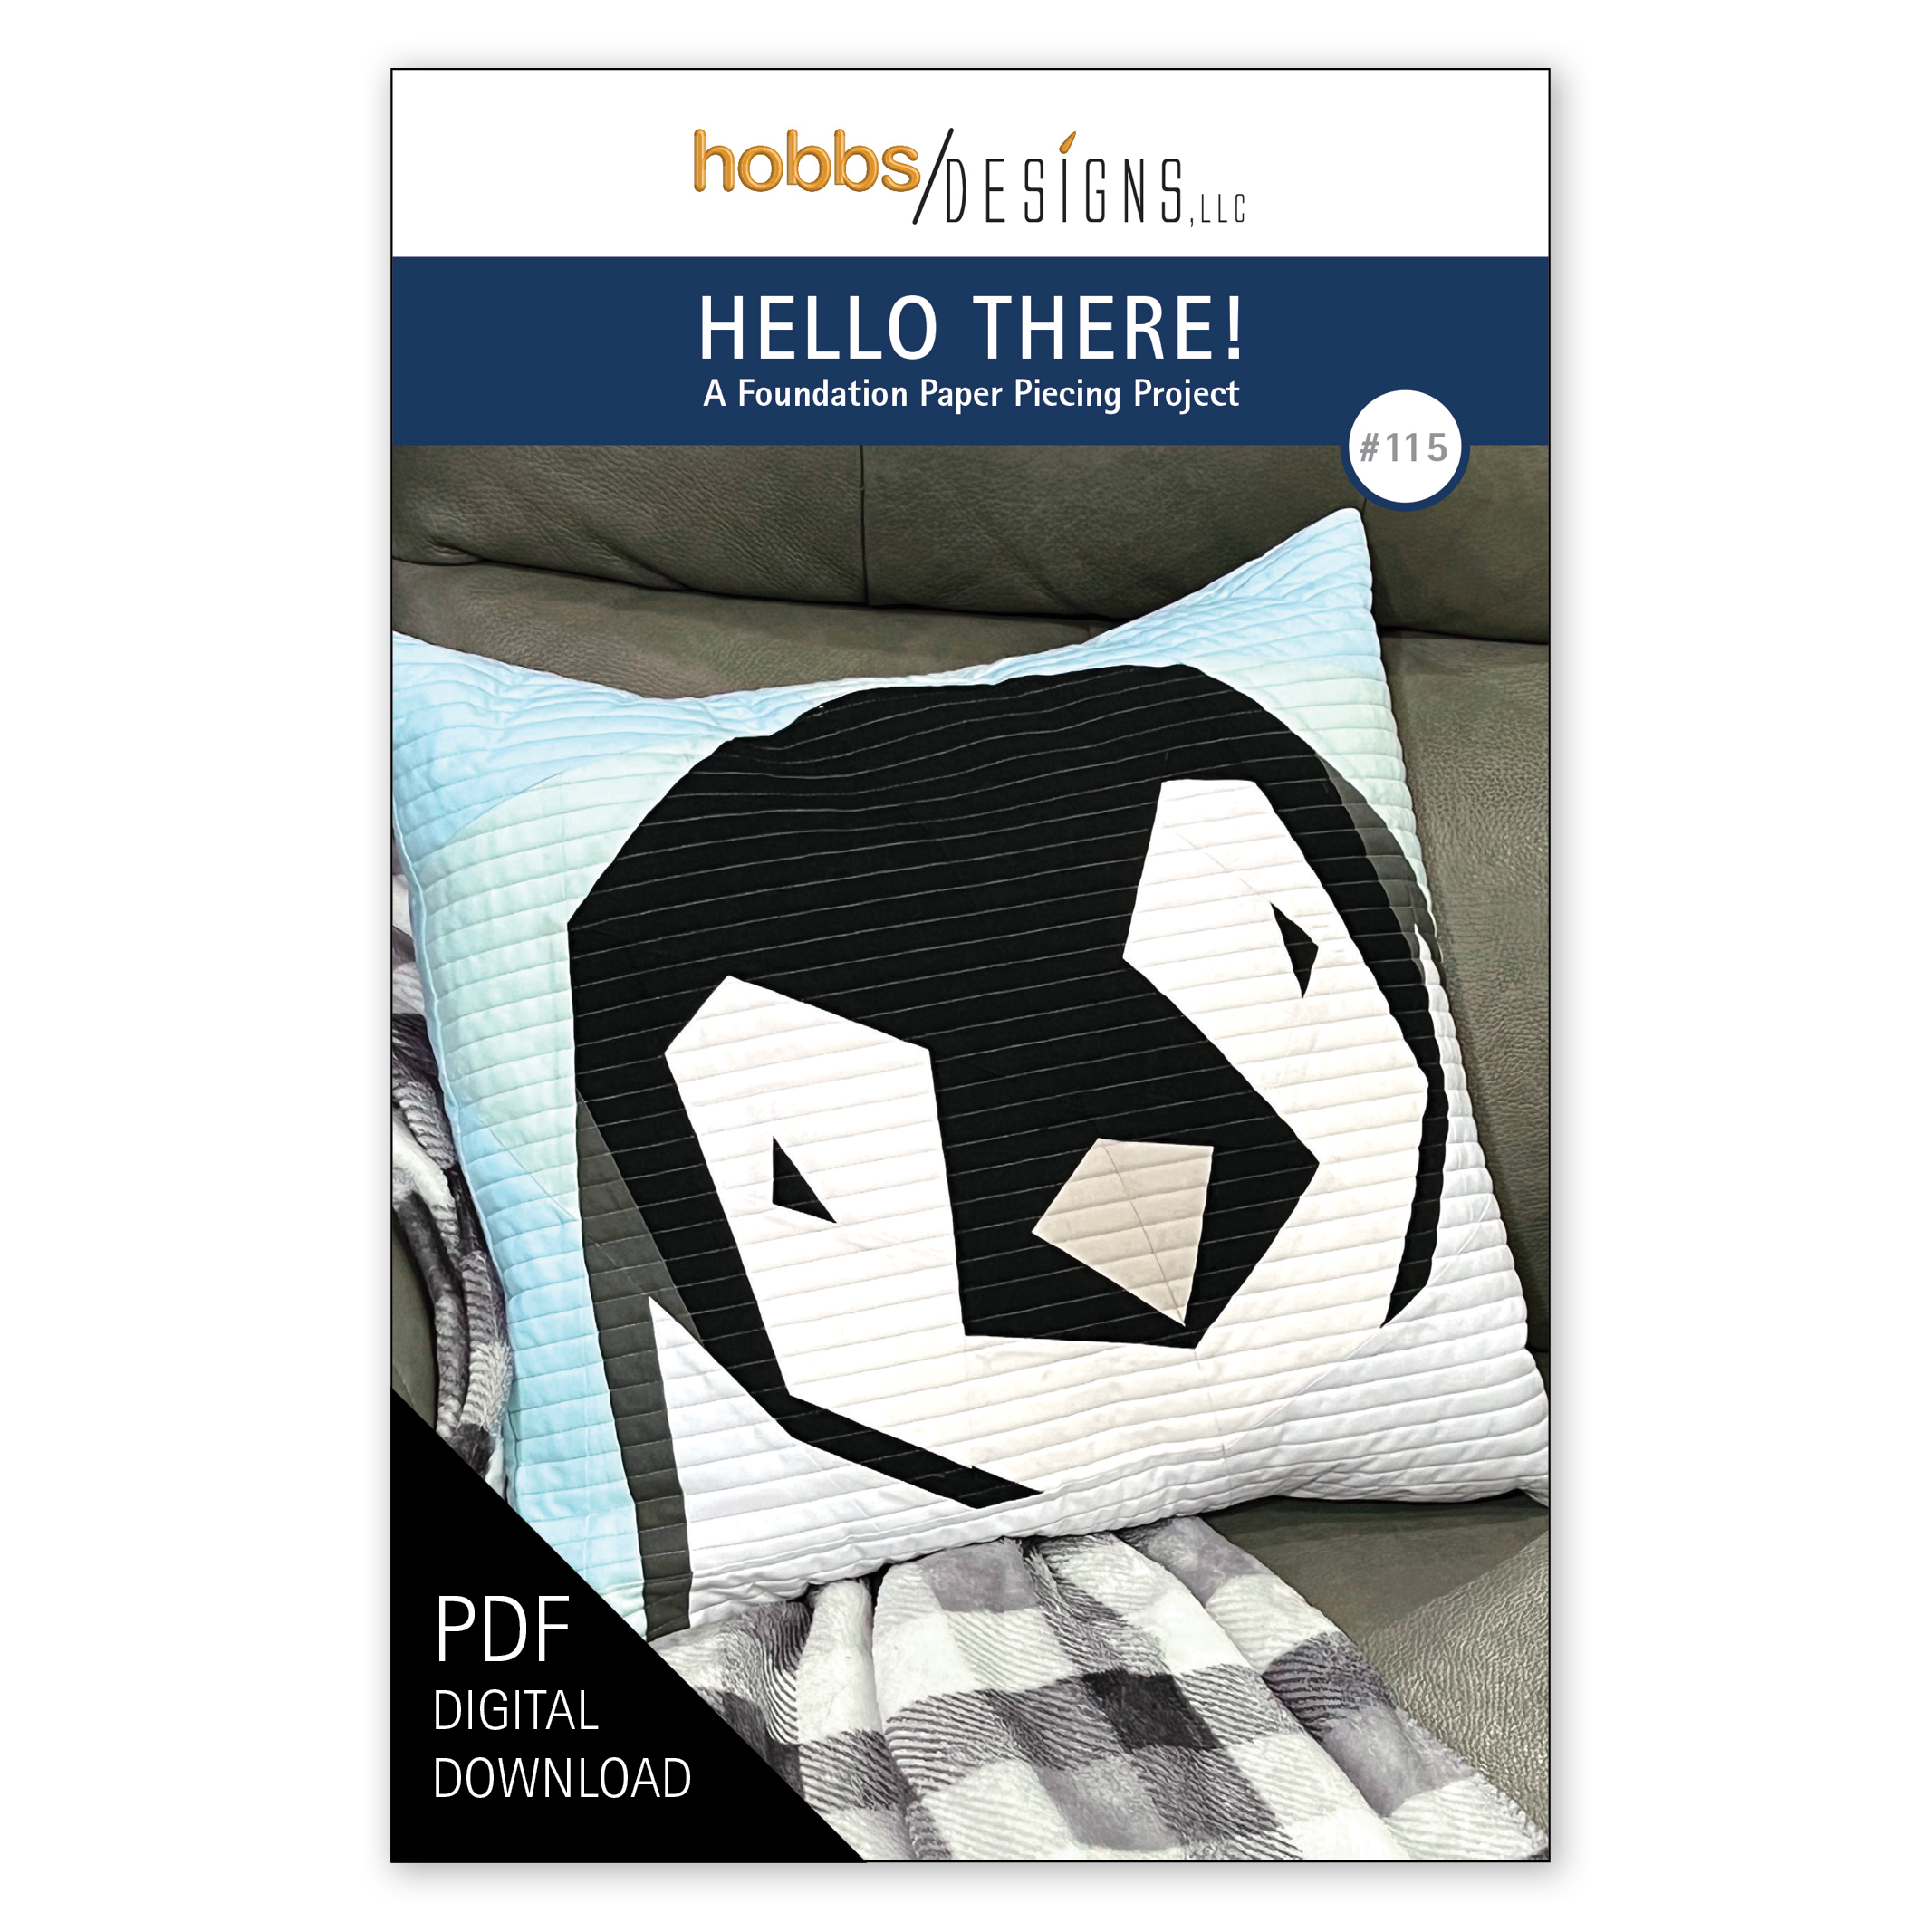 Hello There! Digital Quilt Pattern Cover